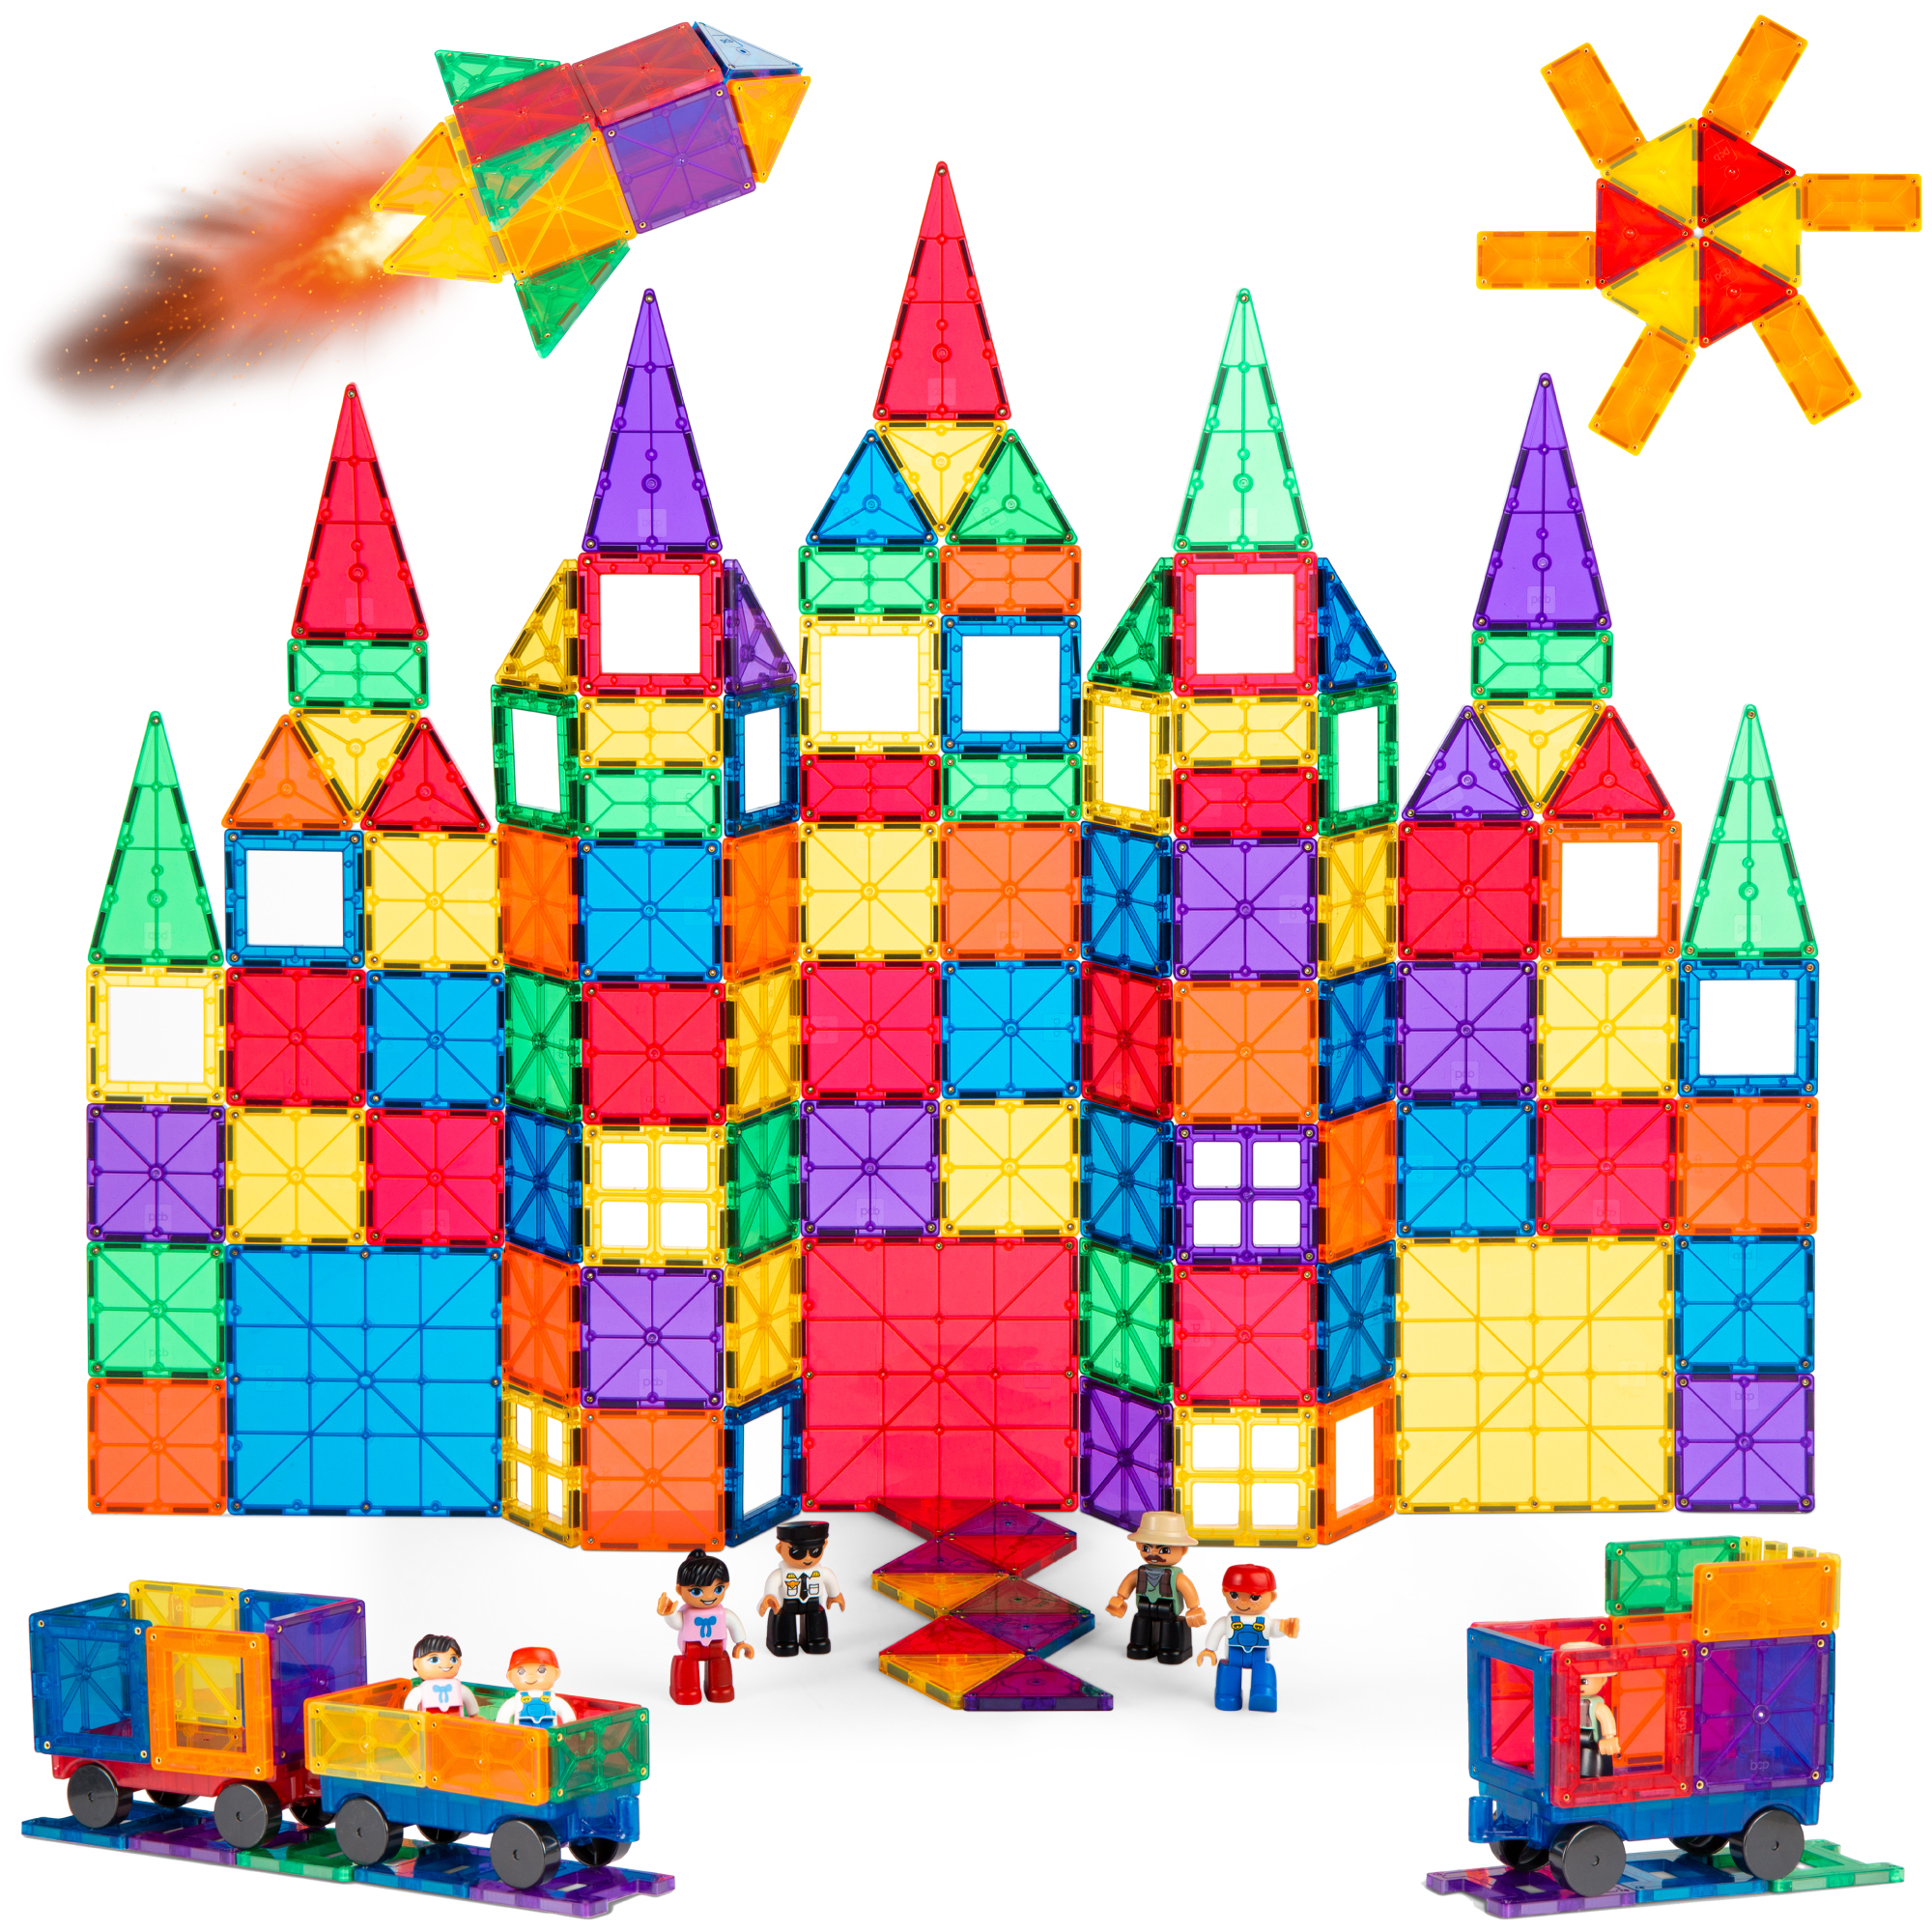 Best Choice Products 265-Piece Kids Magnetic Tiles Set Construction Building Blocks Educational STEM Toy - image 1 of 7